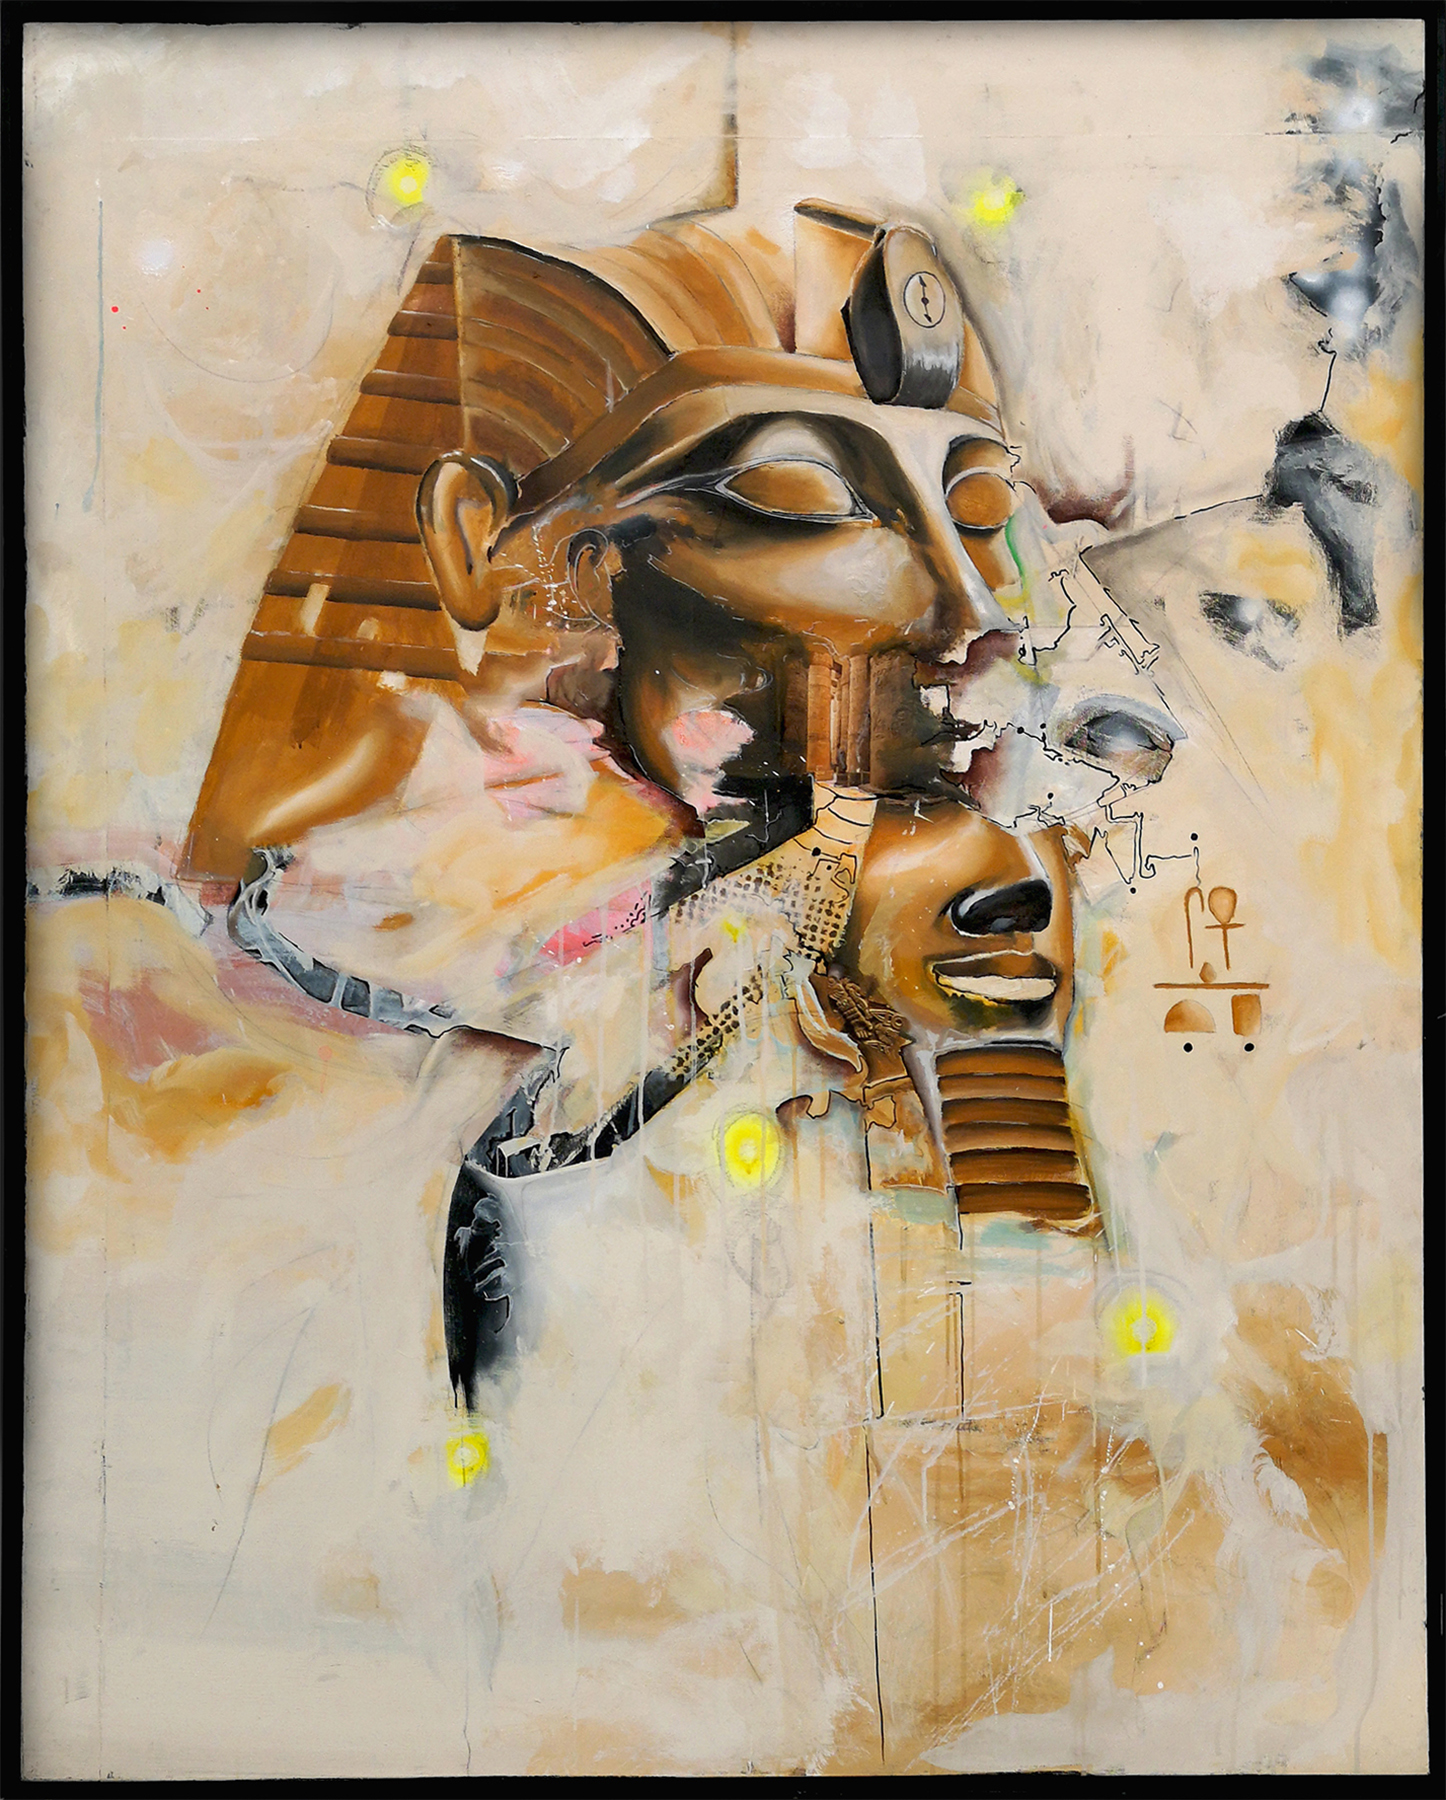 Mixedmedia painting on canvas entitled God Laughs performed with multiple mediums and inspired by the ancient Egyptian temple of Amon.